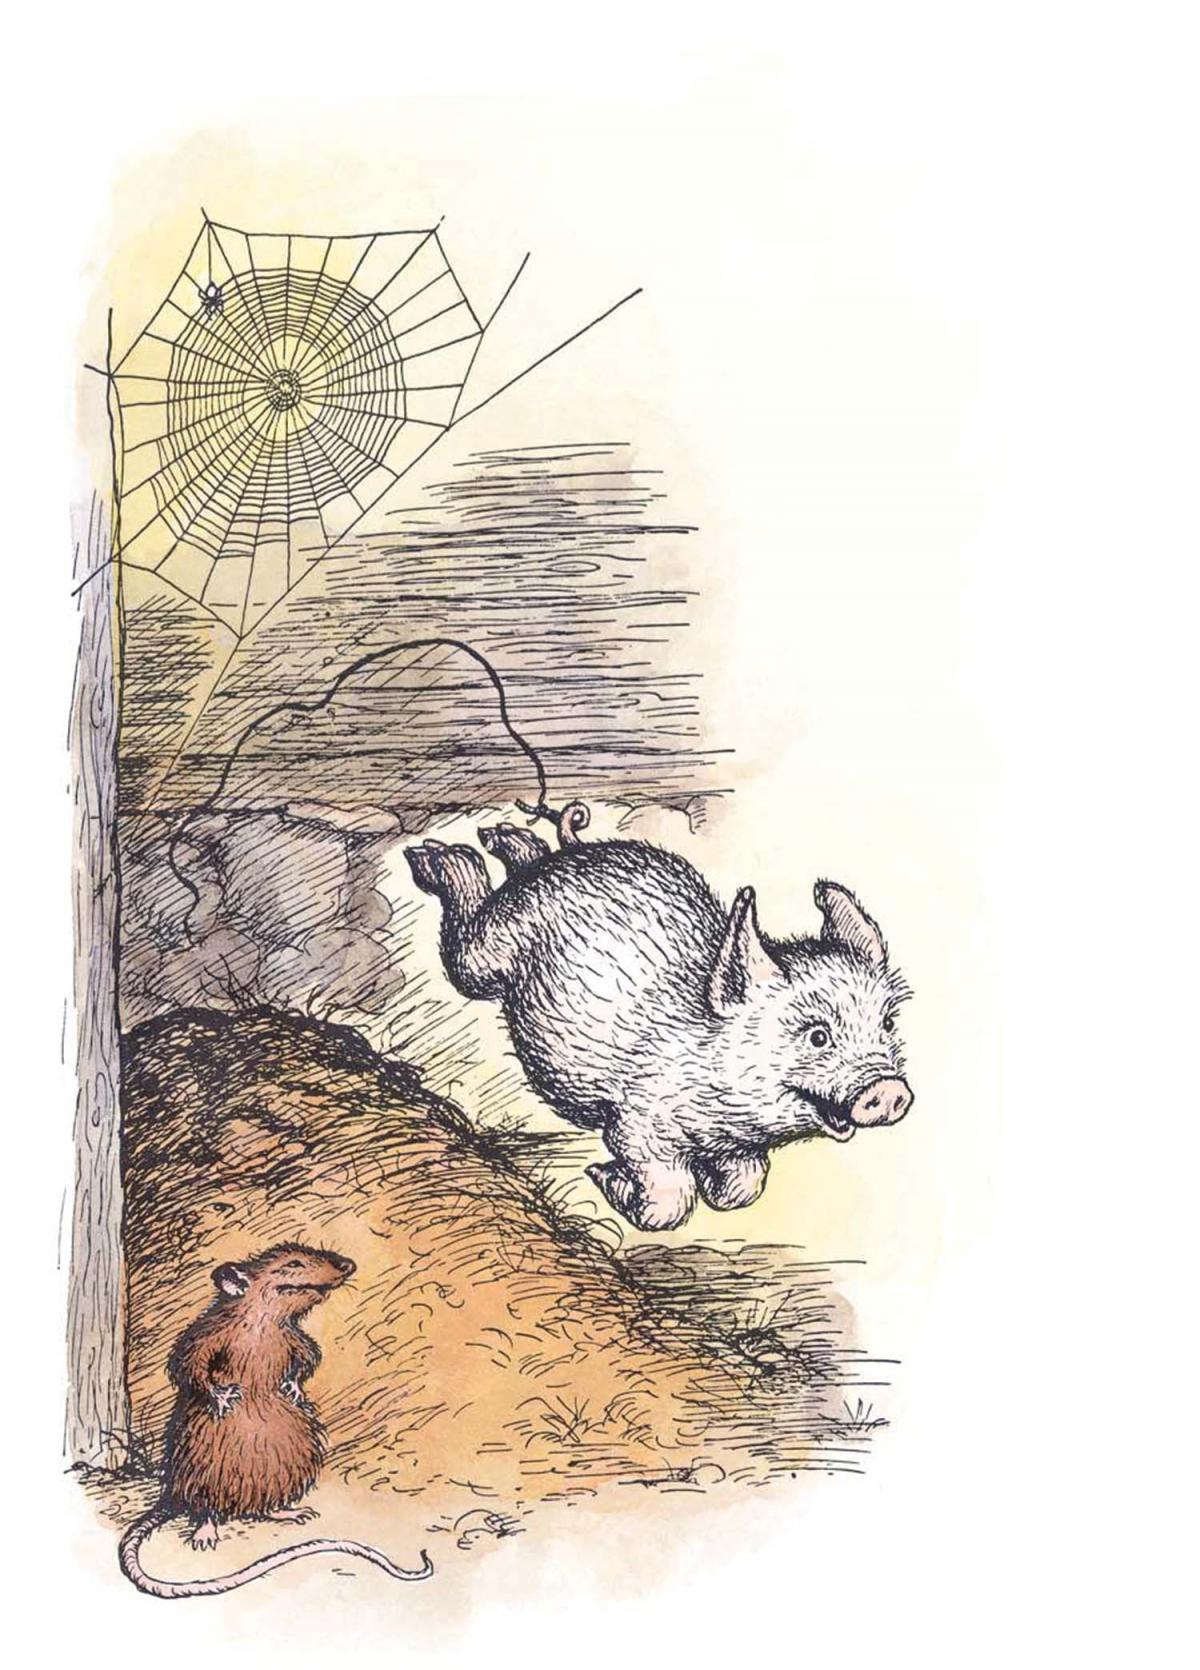 Wilbur leaps down a pile of hay with string attached to his tail, while a rat looks on and laughs